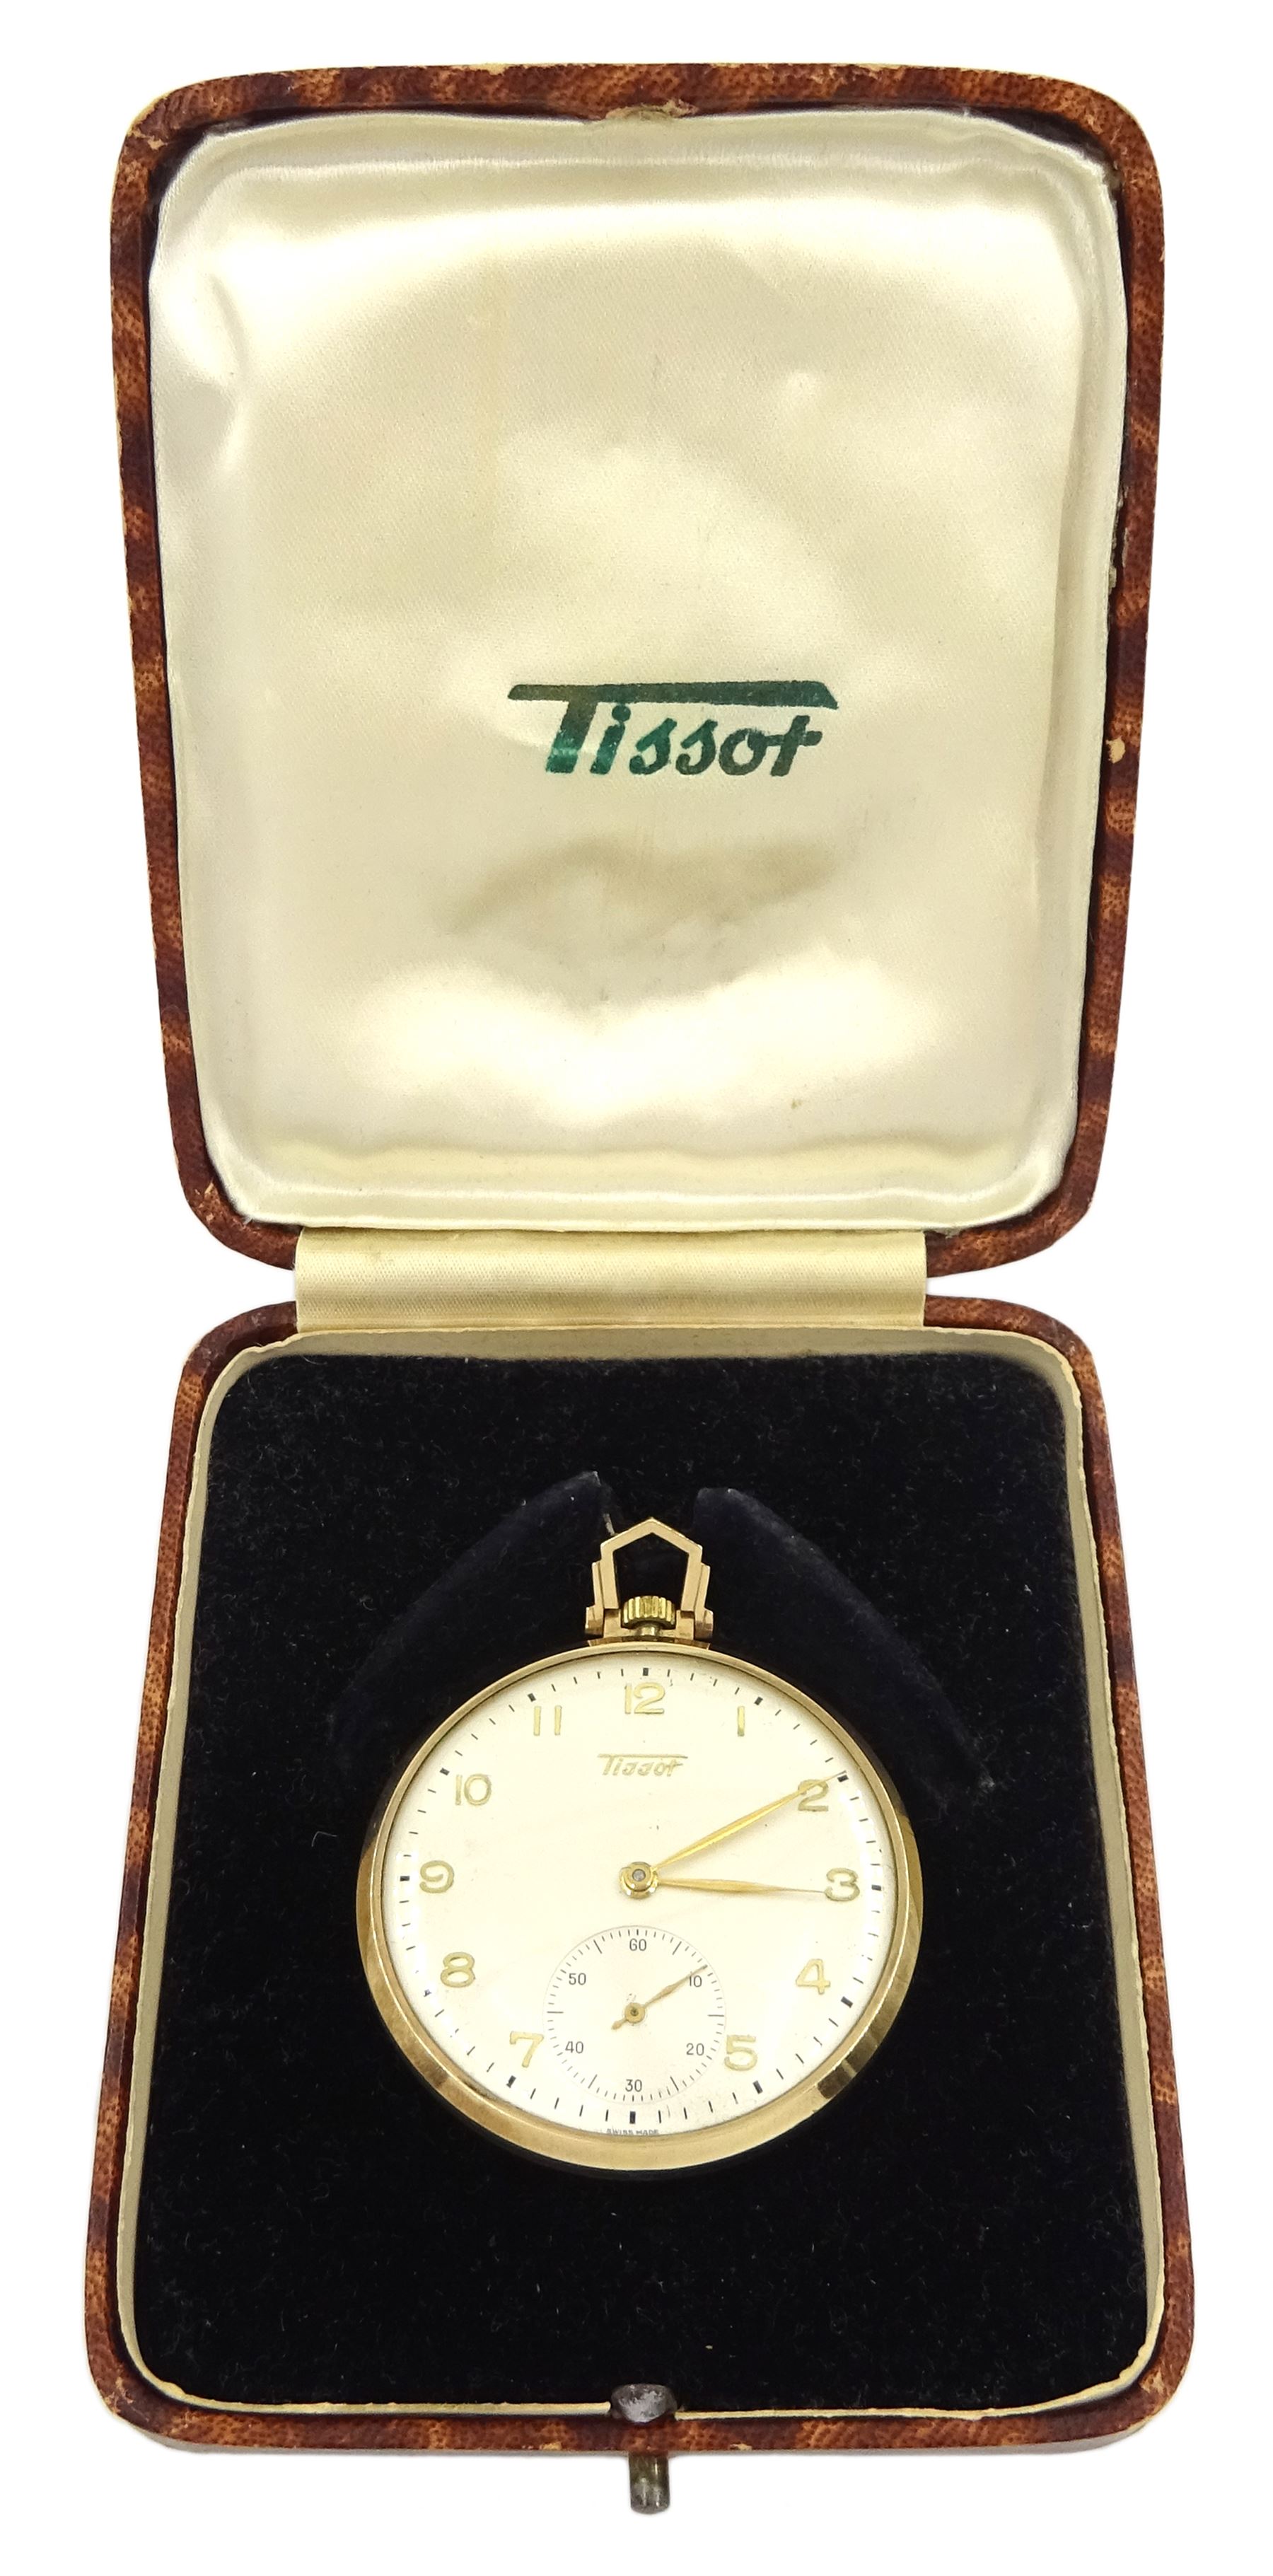 9ct gold open face keyless lever pocket watch by Tissot - Image 2 of 3